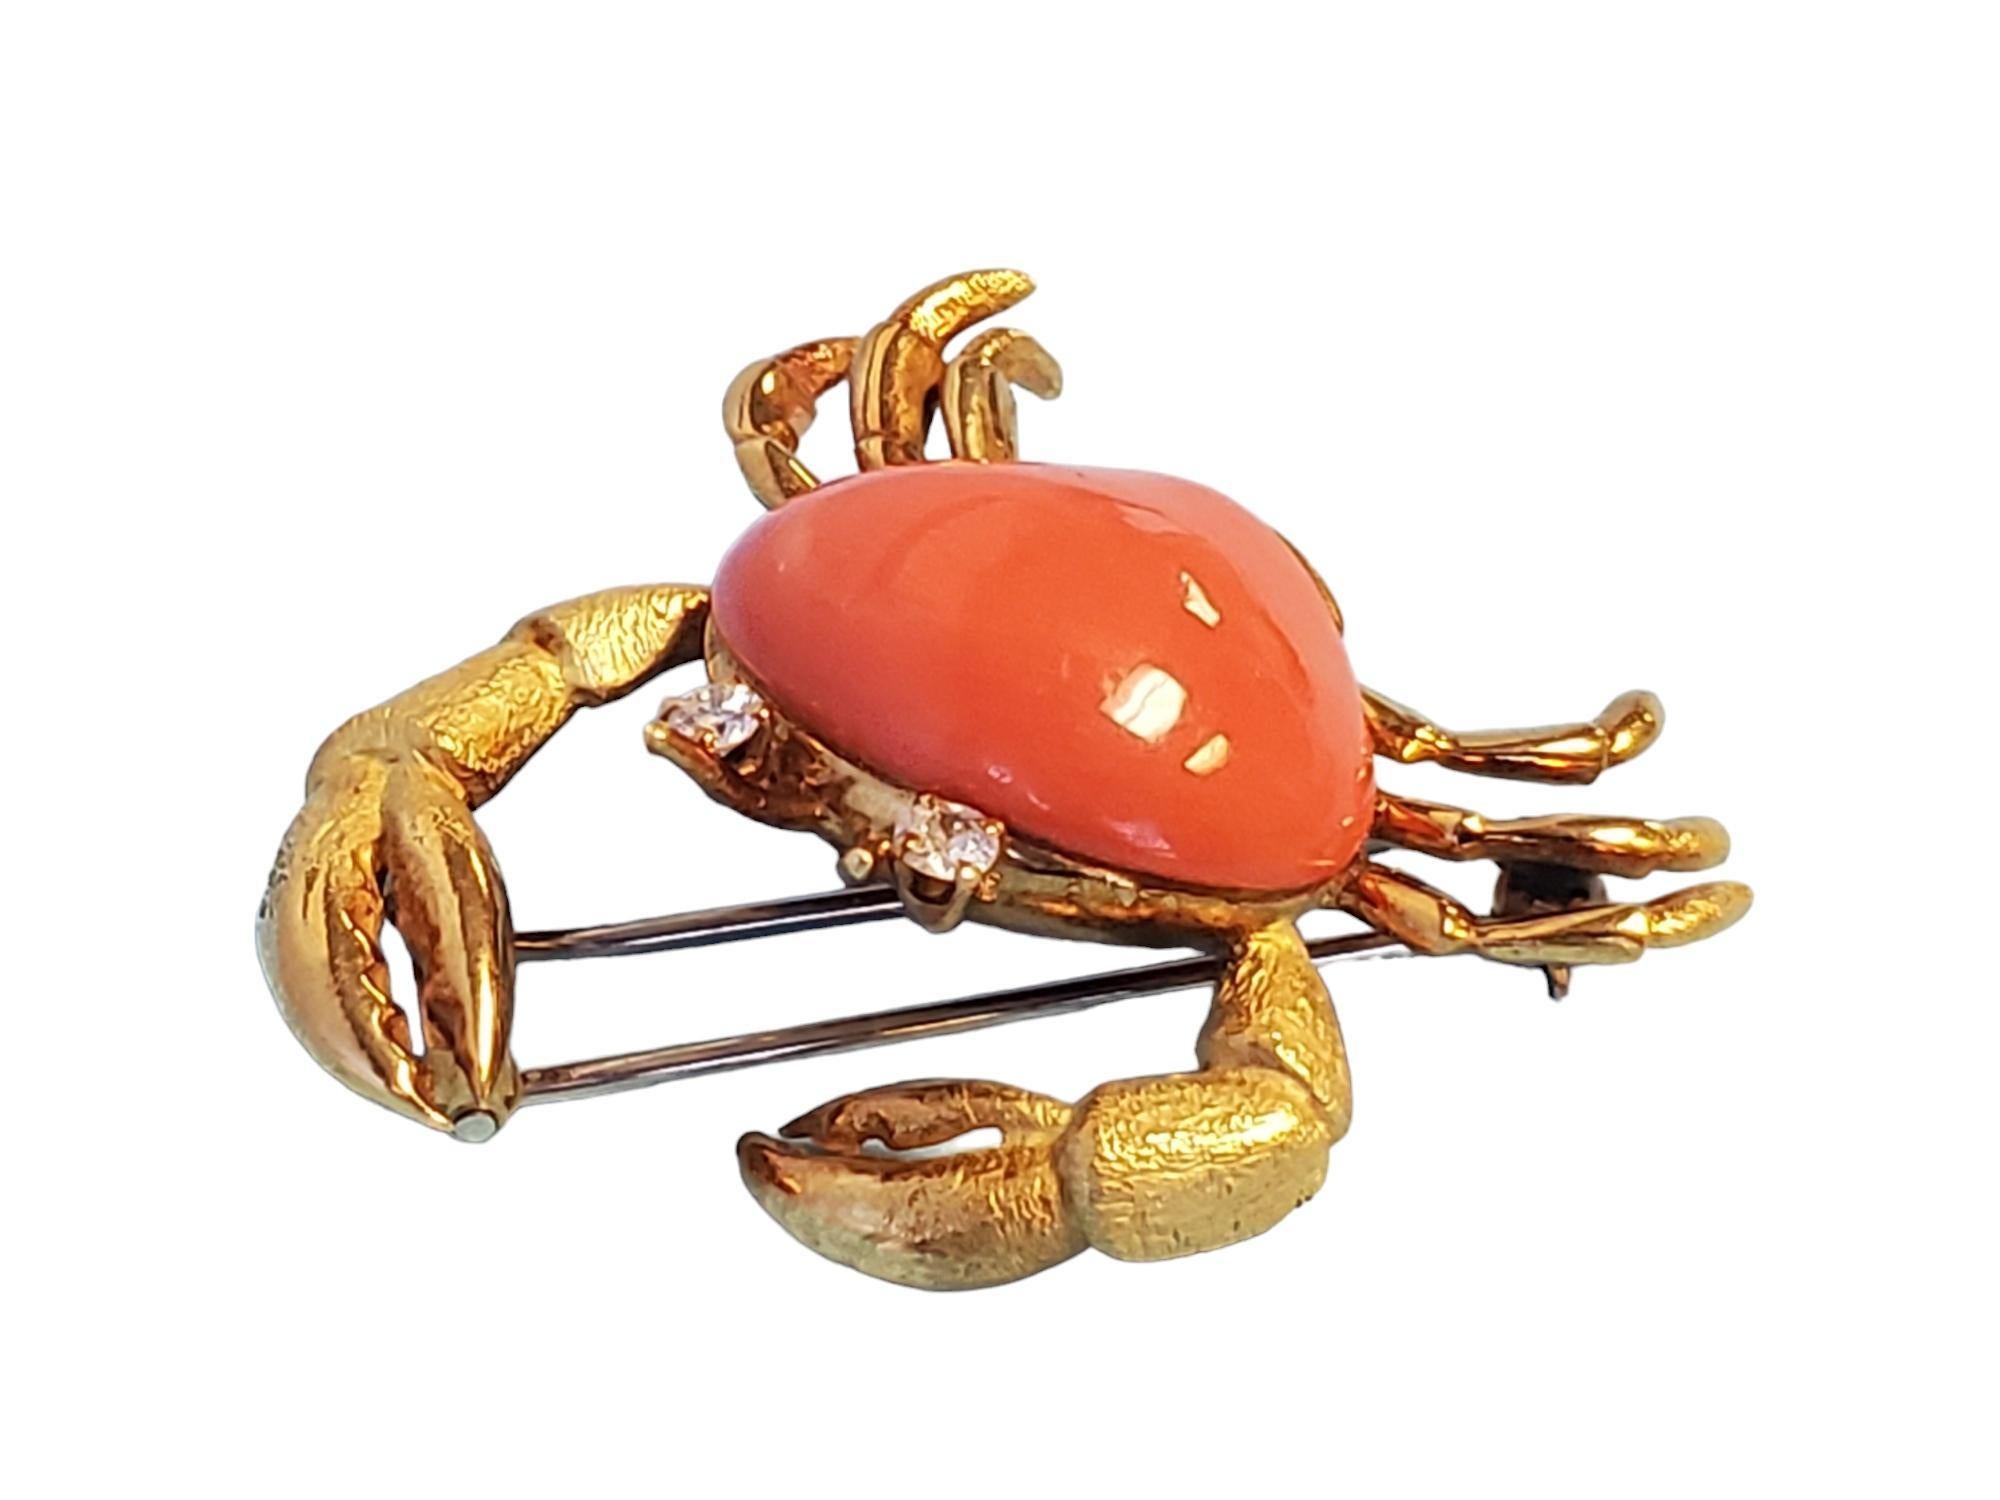 Cabochon Estate Vintage Crab Brooch Pin 18k Yellow Gold Angel Skin Coral Body VS Diamonds For Sale